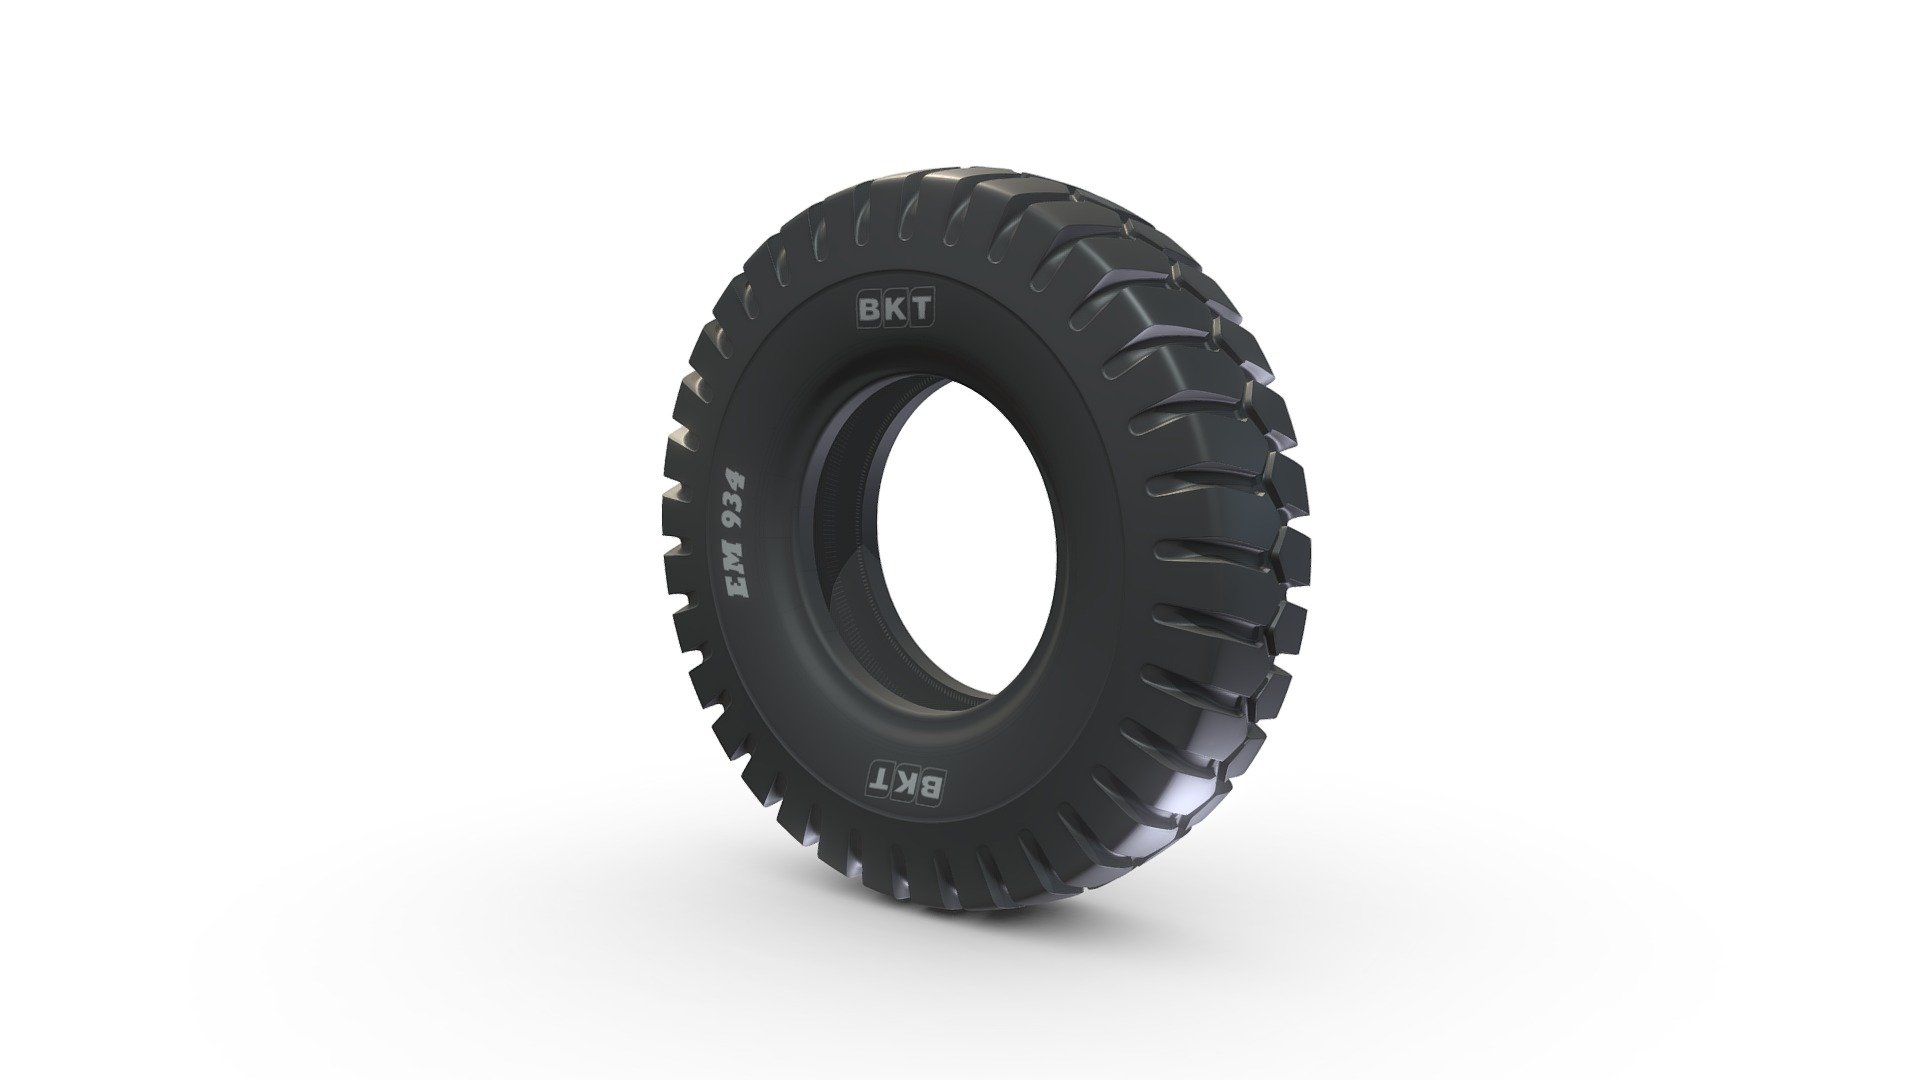 EM 934 has been specially designed for excavators in road construction applications. It shows excellent lateral traction as well as outstanding self-cleaning features. The unique tread compound offers cut and chip resistance whereas the strong casing provides a long service life 3d model